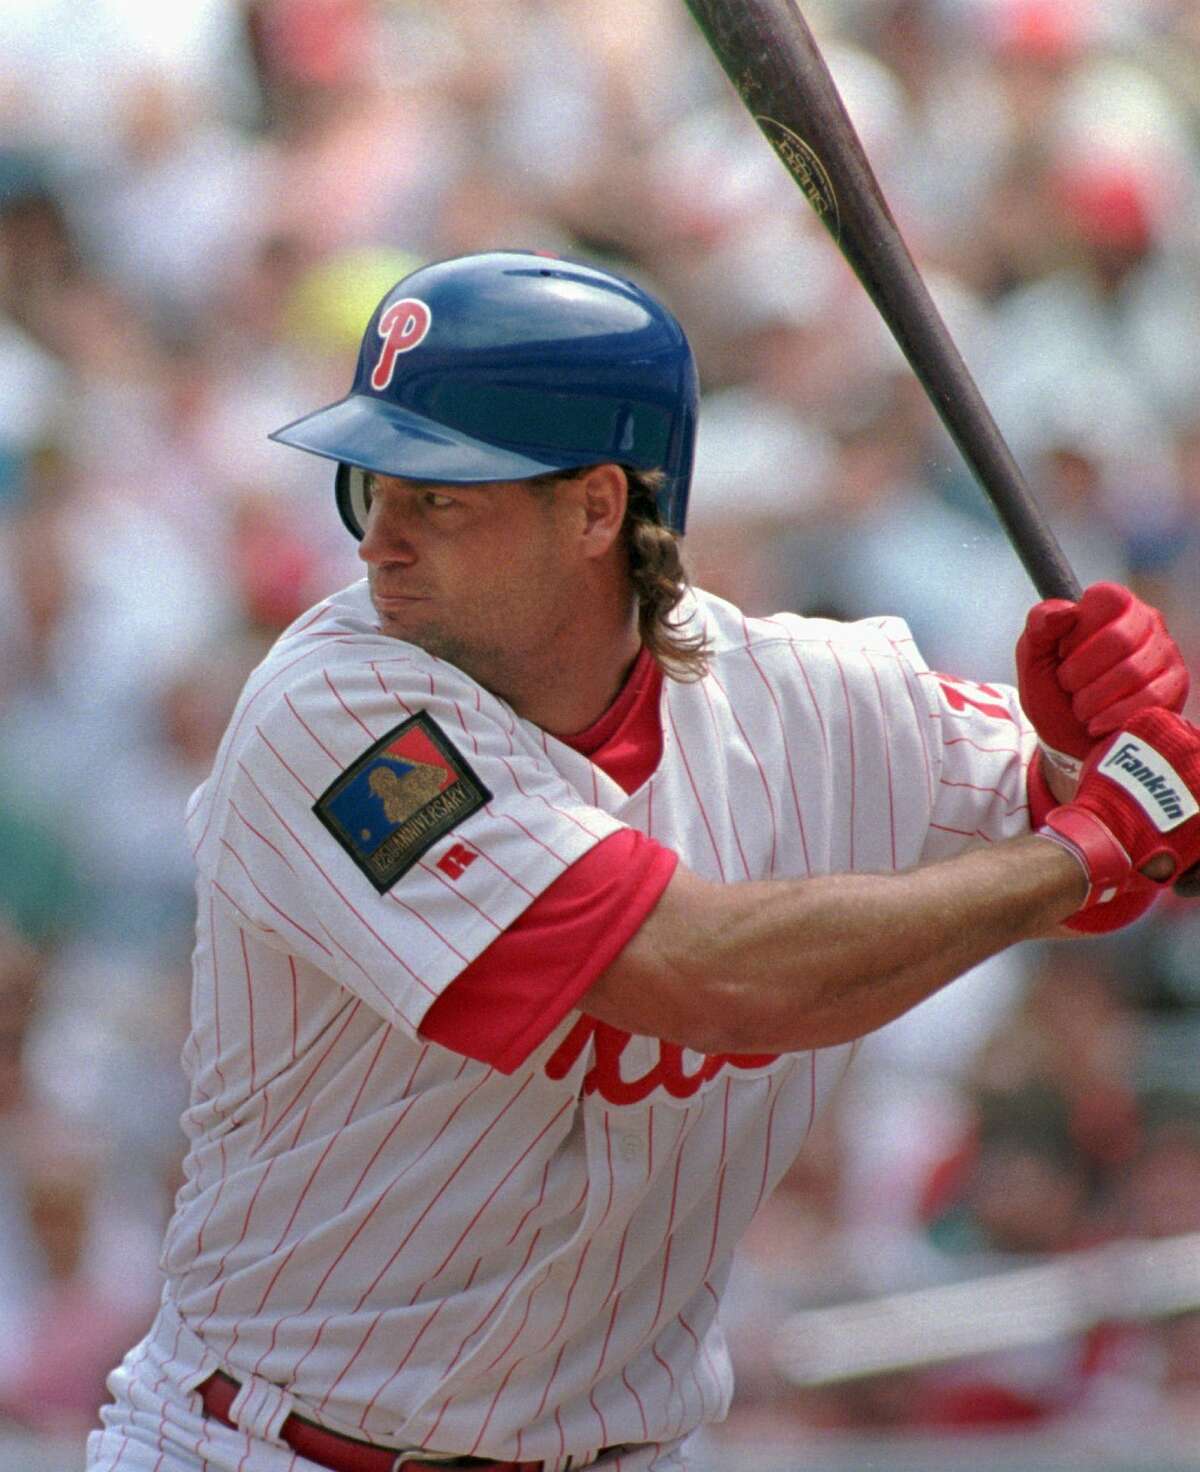 FILE- In this April 19, 1994, file, photo, Philadelphia Phillies' Darren Daulton bats against the Los Angeles Dodgers in Philadelphia. Daulton, the All-Star catcher who was the leader of the Phillies' NL championship team in 1993, has died. He was 55. (AP Photo/George Widman, File)